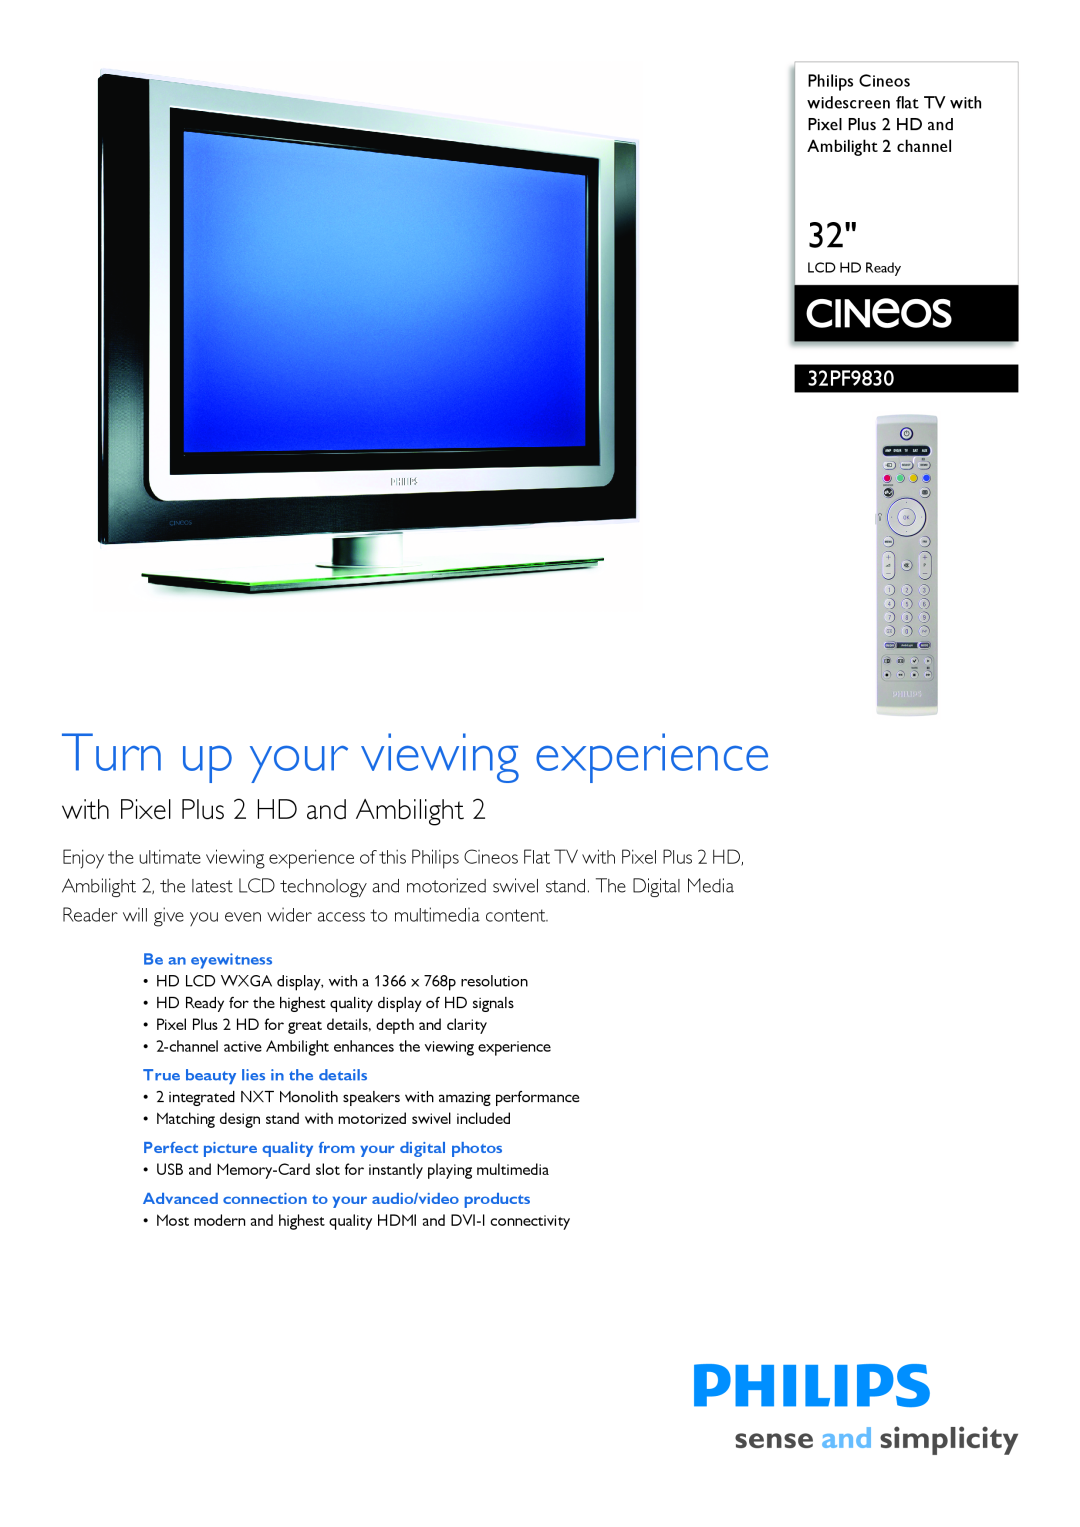 Philips 32PF9830 manual Turn up your viewing experience, with Pixel Plus 2 HD and Ambilight 